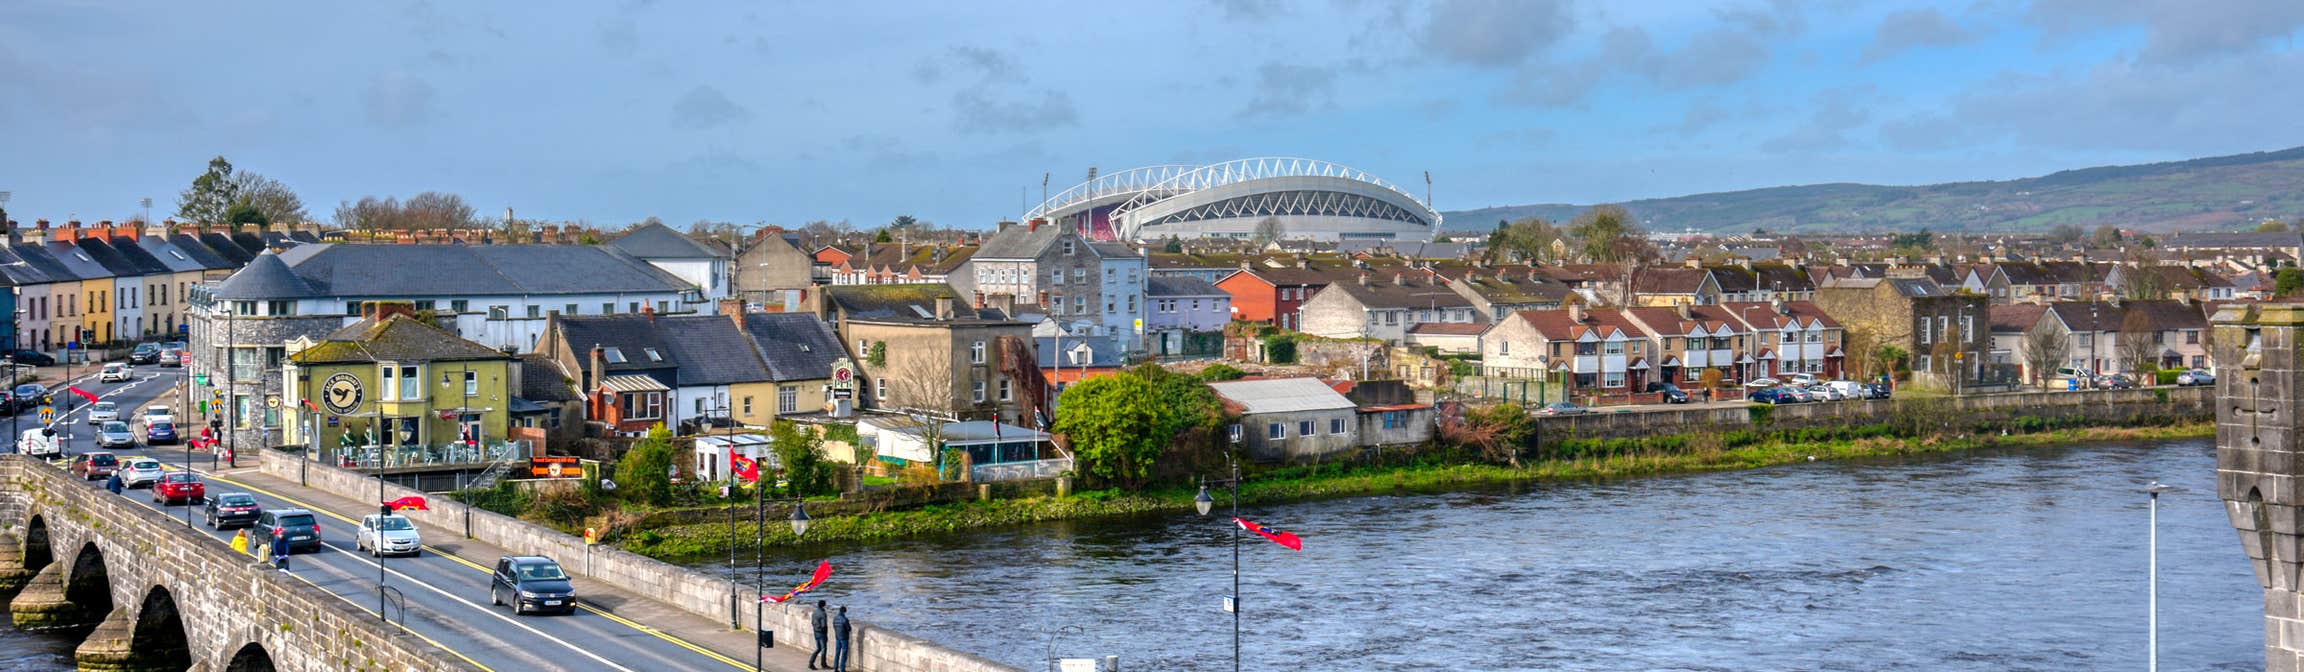 View of Thomond Park from King John's Castle, Limerick City, County Limerick